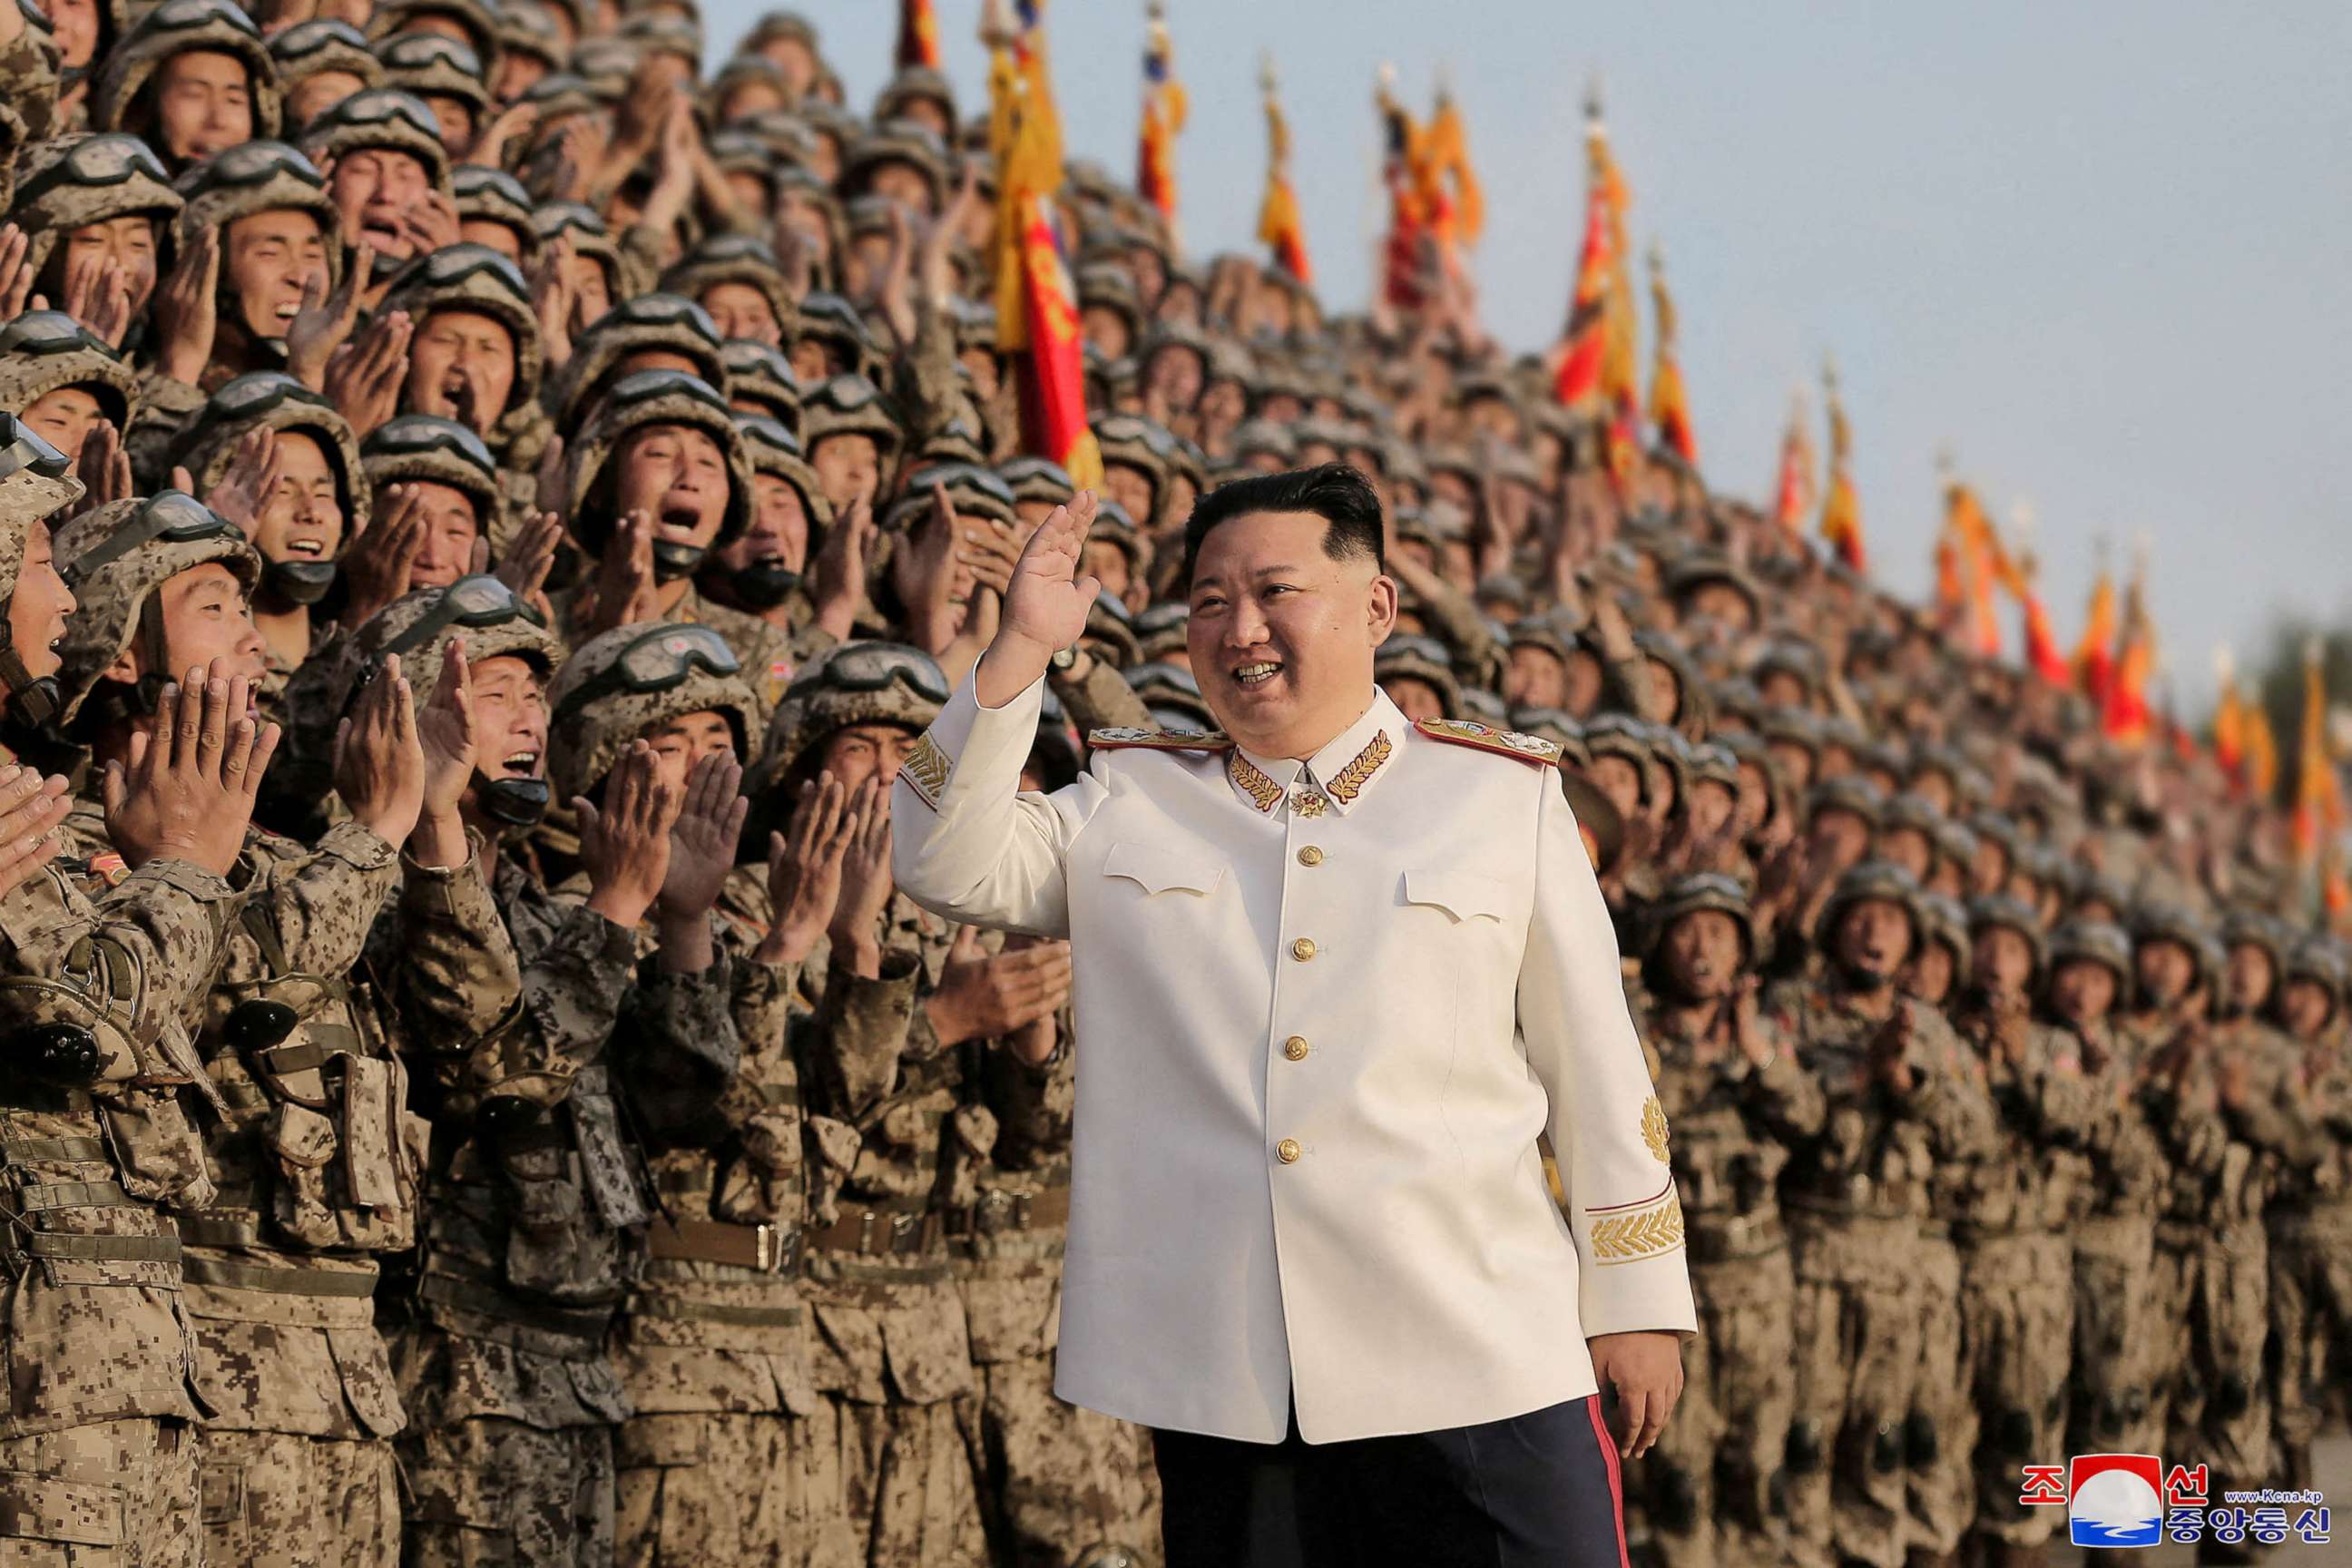 PHOTO: North Korean leader Kim Jong Un meets troops who have taken part in a military parade to mark the 90th anniversary of the founding of the Korean People's Revolutionary Army.